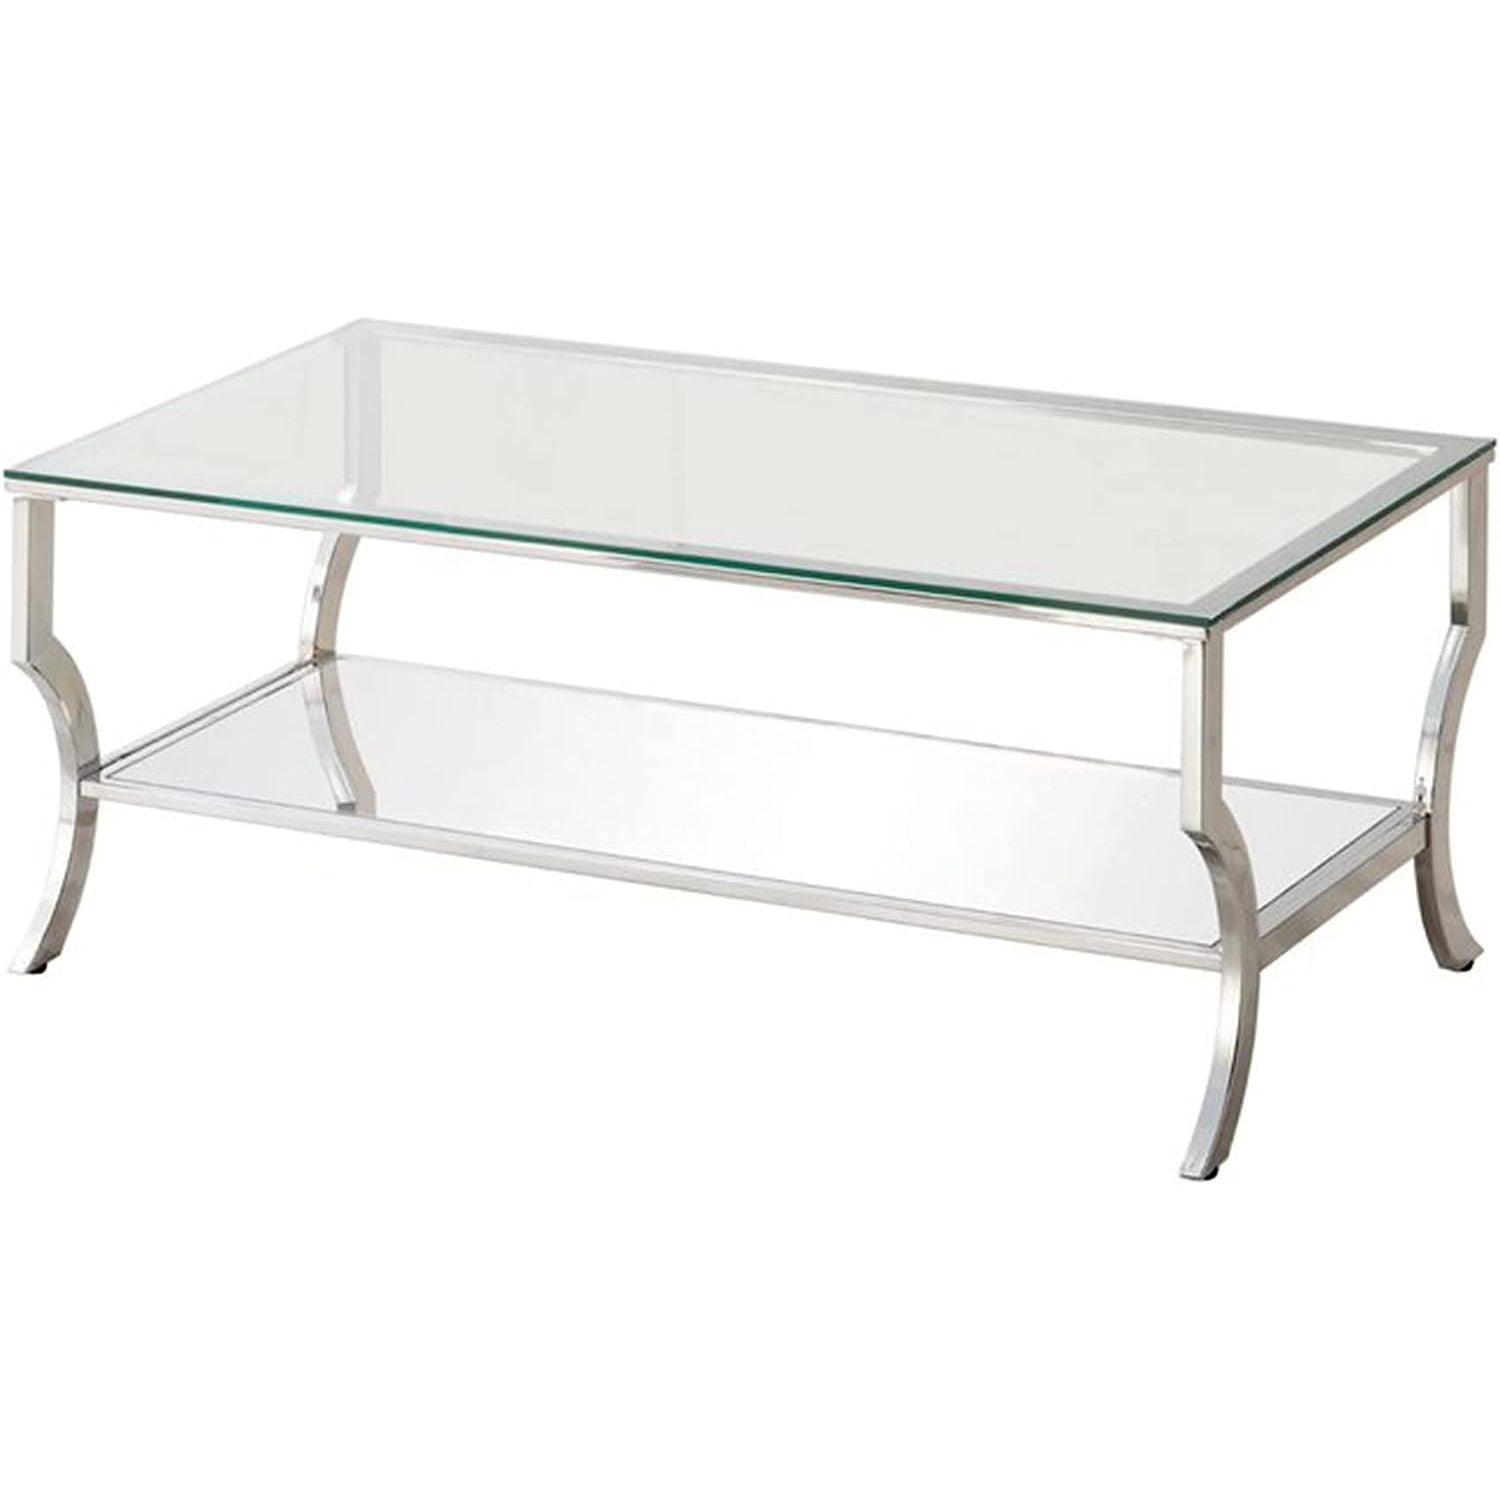 Chic Mirage 24" Rectangular Chrome Coffee Table with Glass Top and Mirrored Shelf